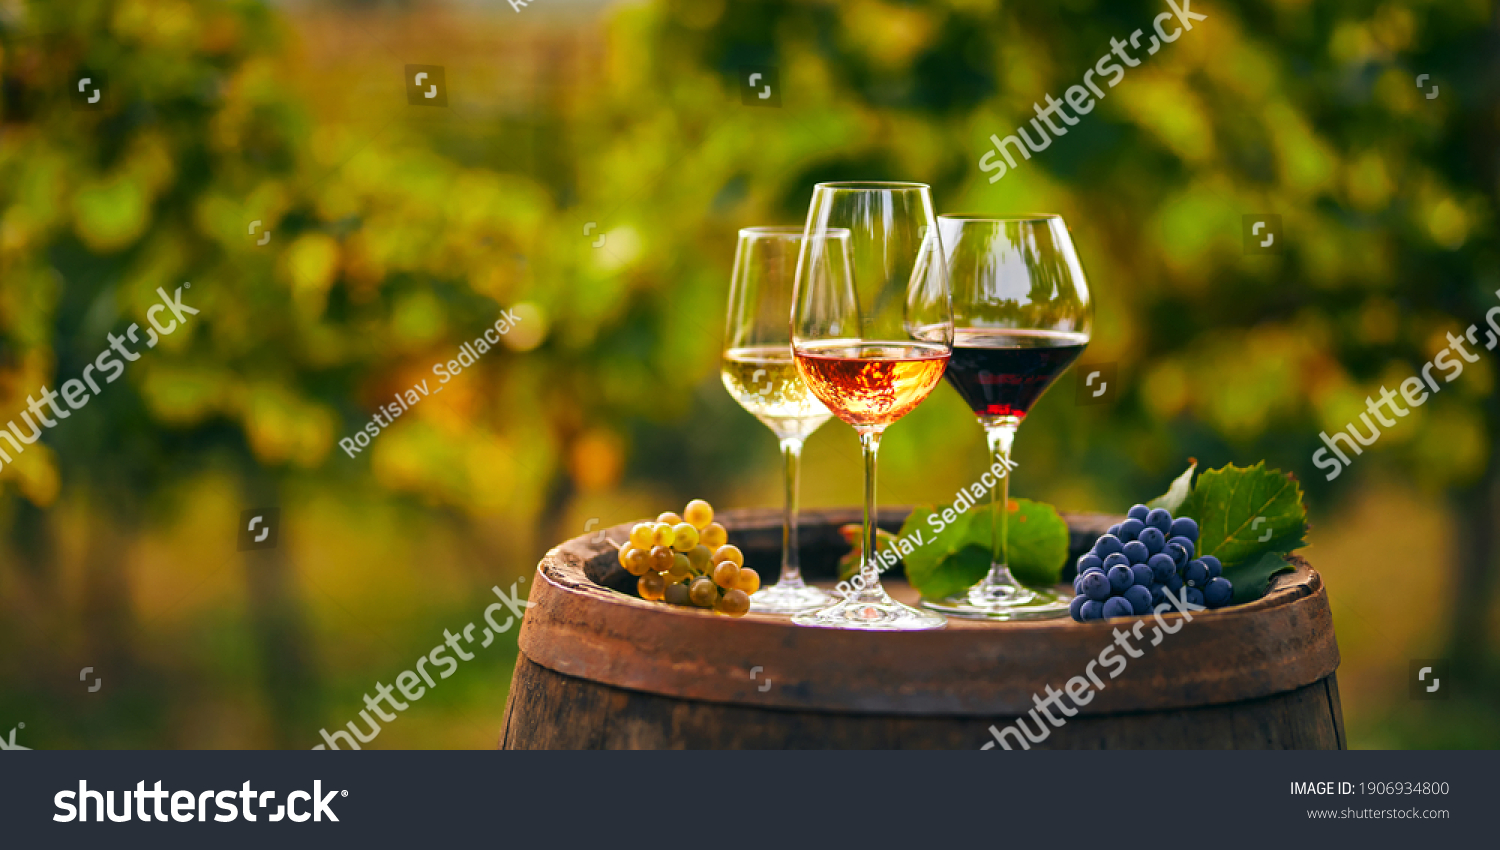 Three glasses with white, rose and red wine on a wooden barrel in the vineyard. Wide photo #1906934800